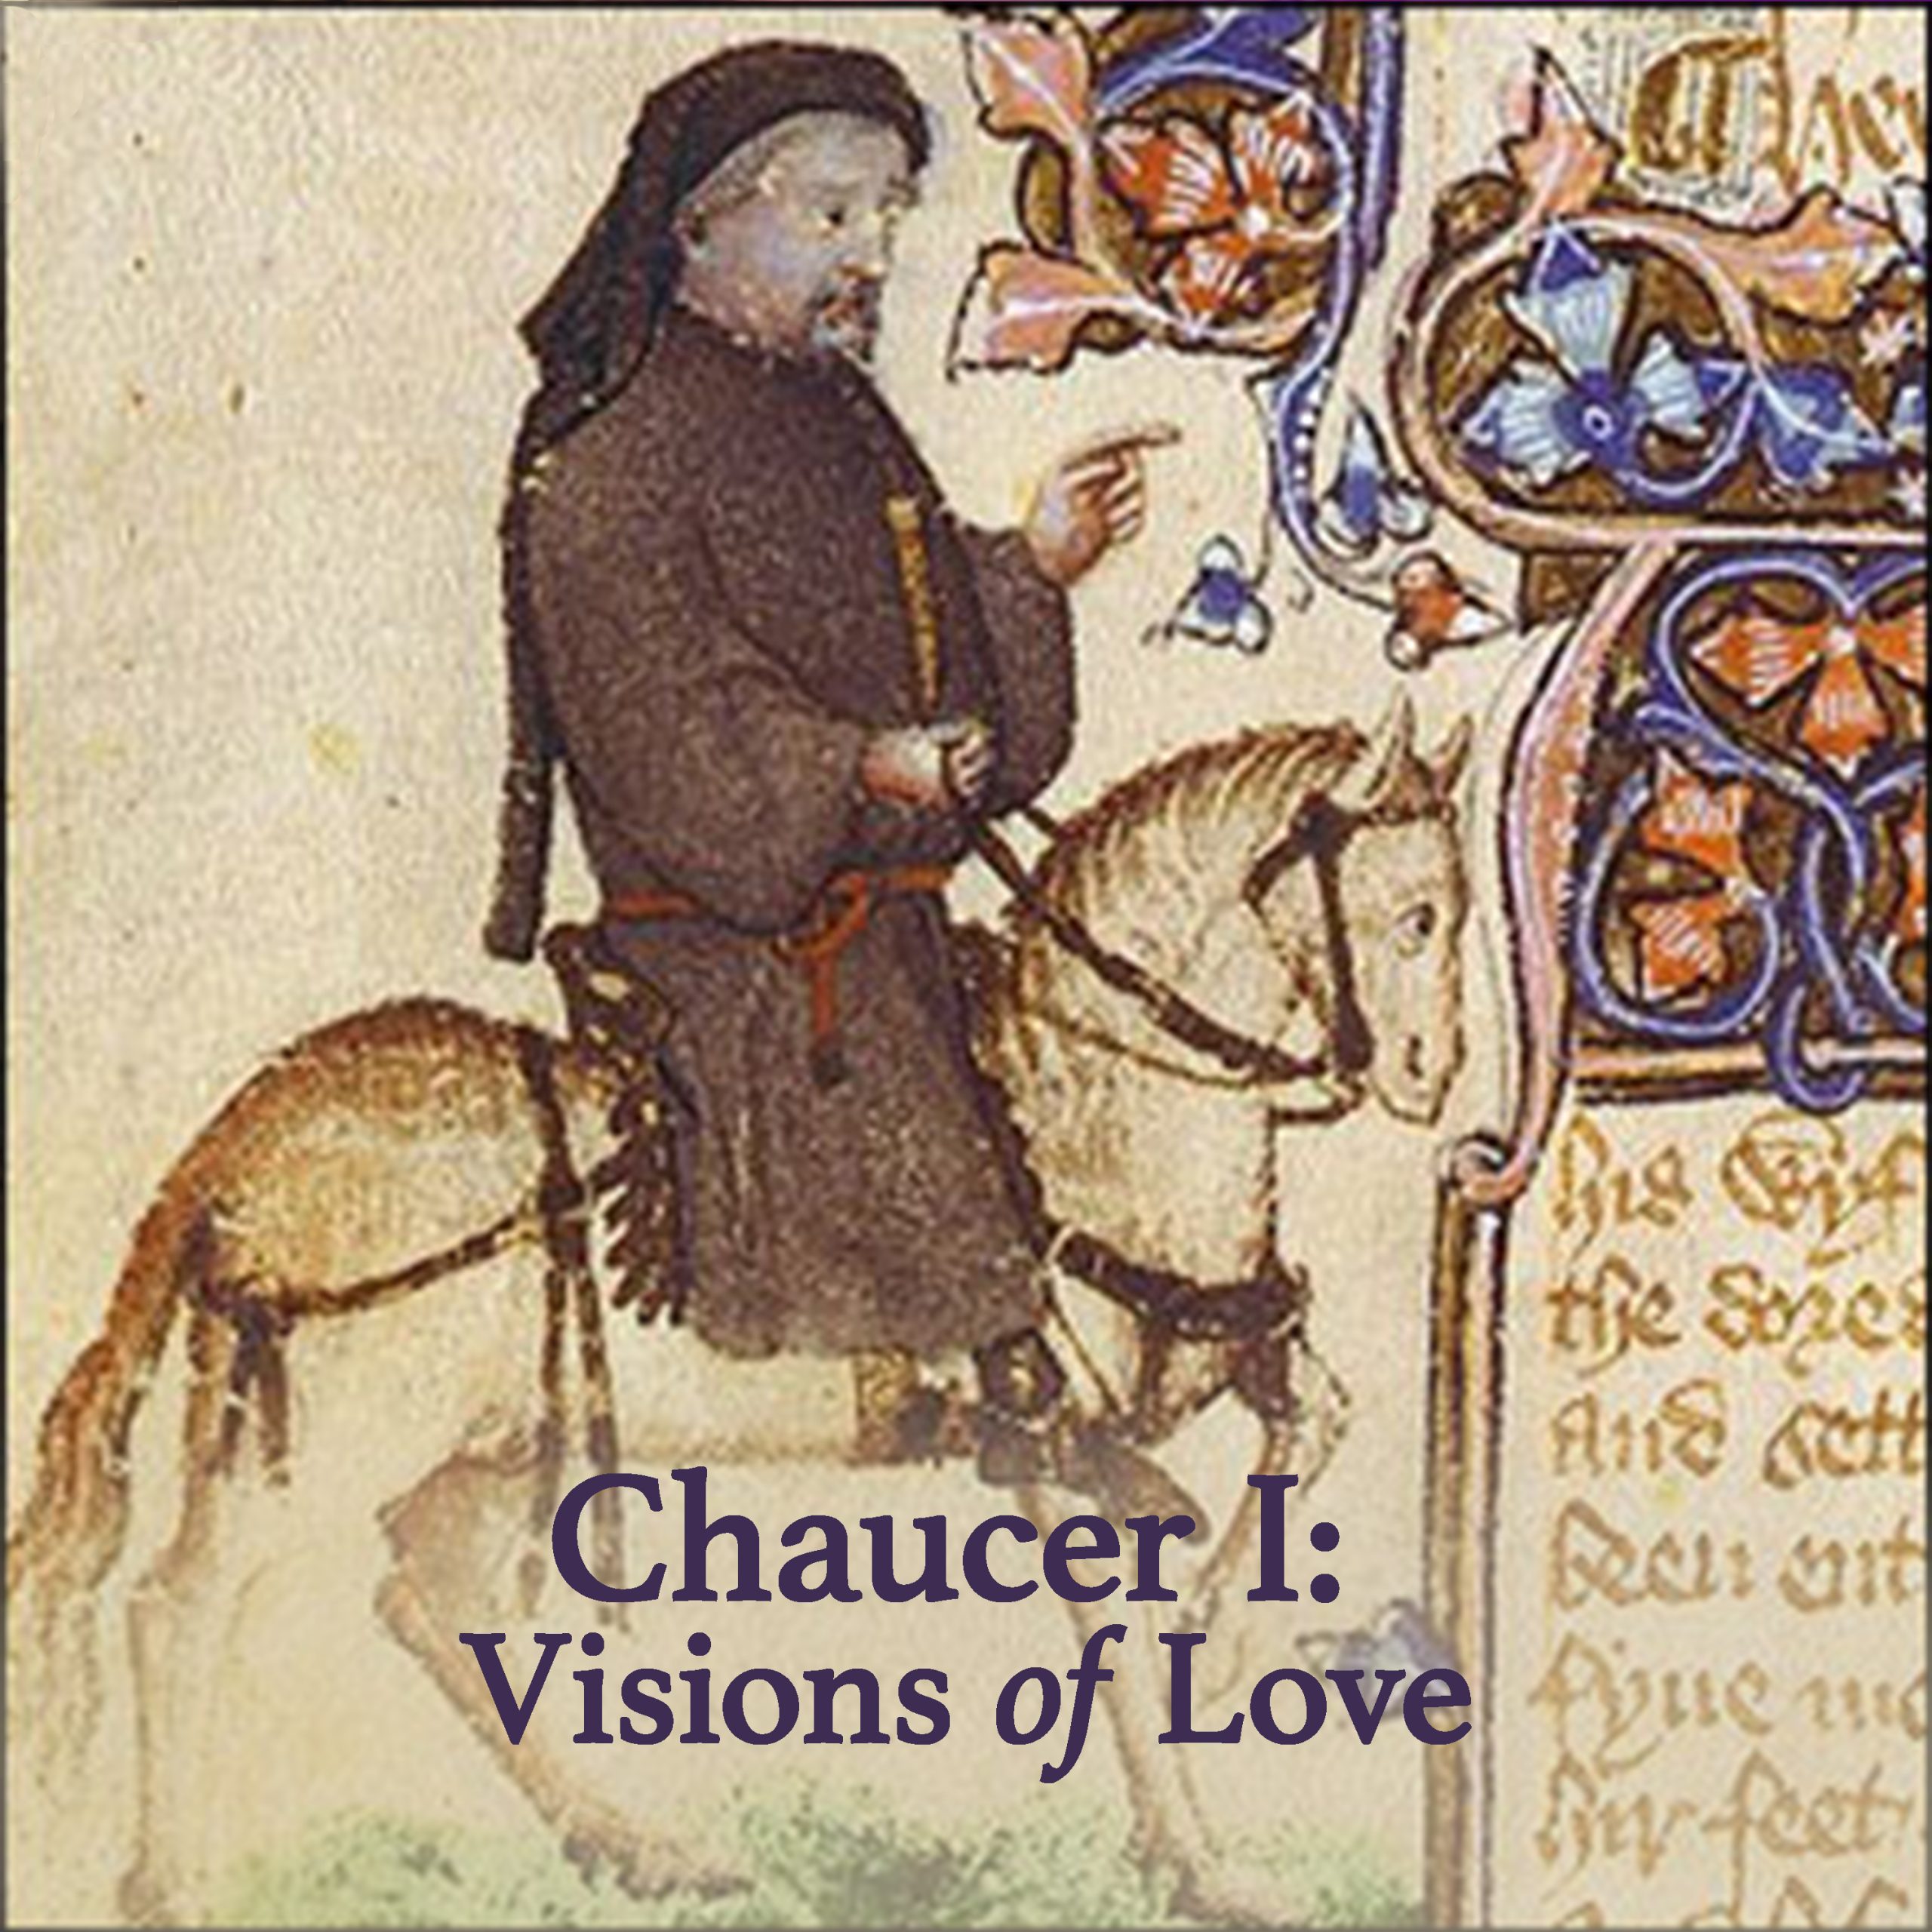 Chaucer I: Visions of Love